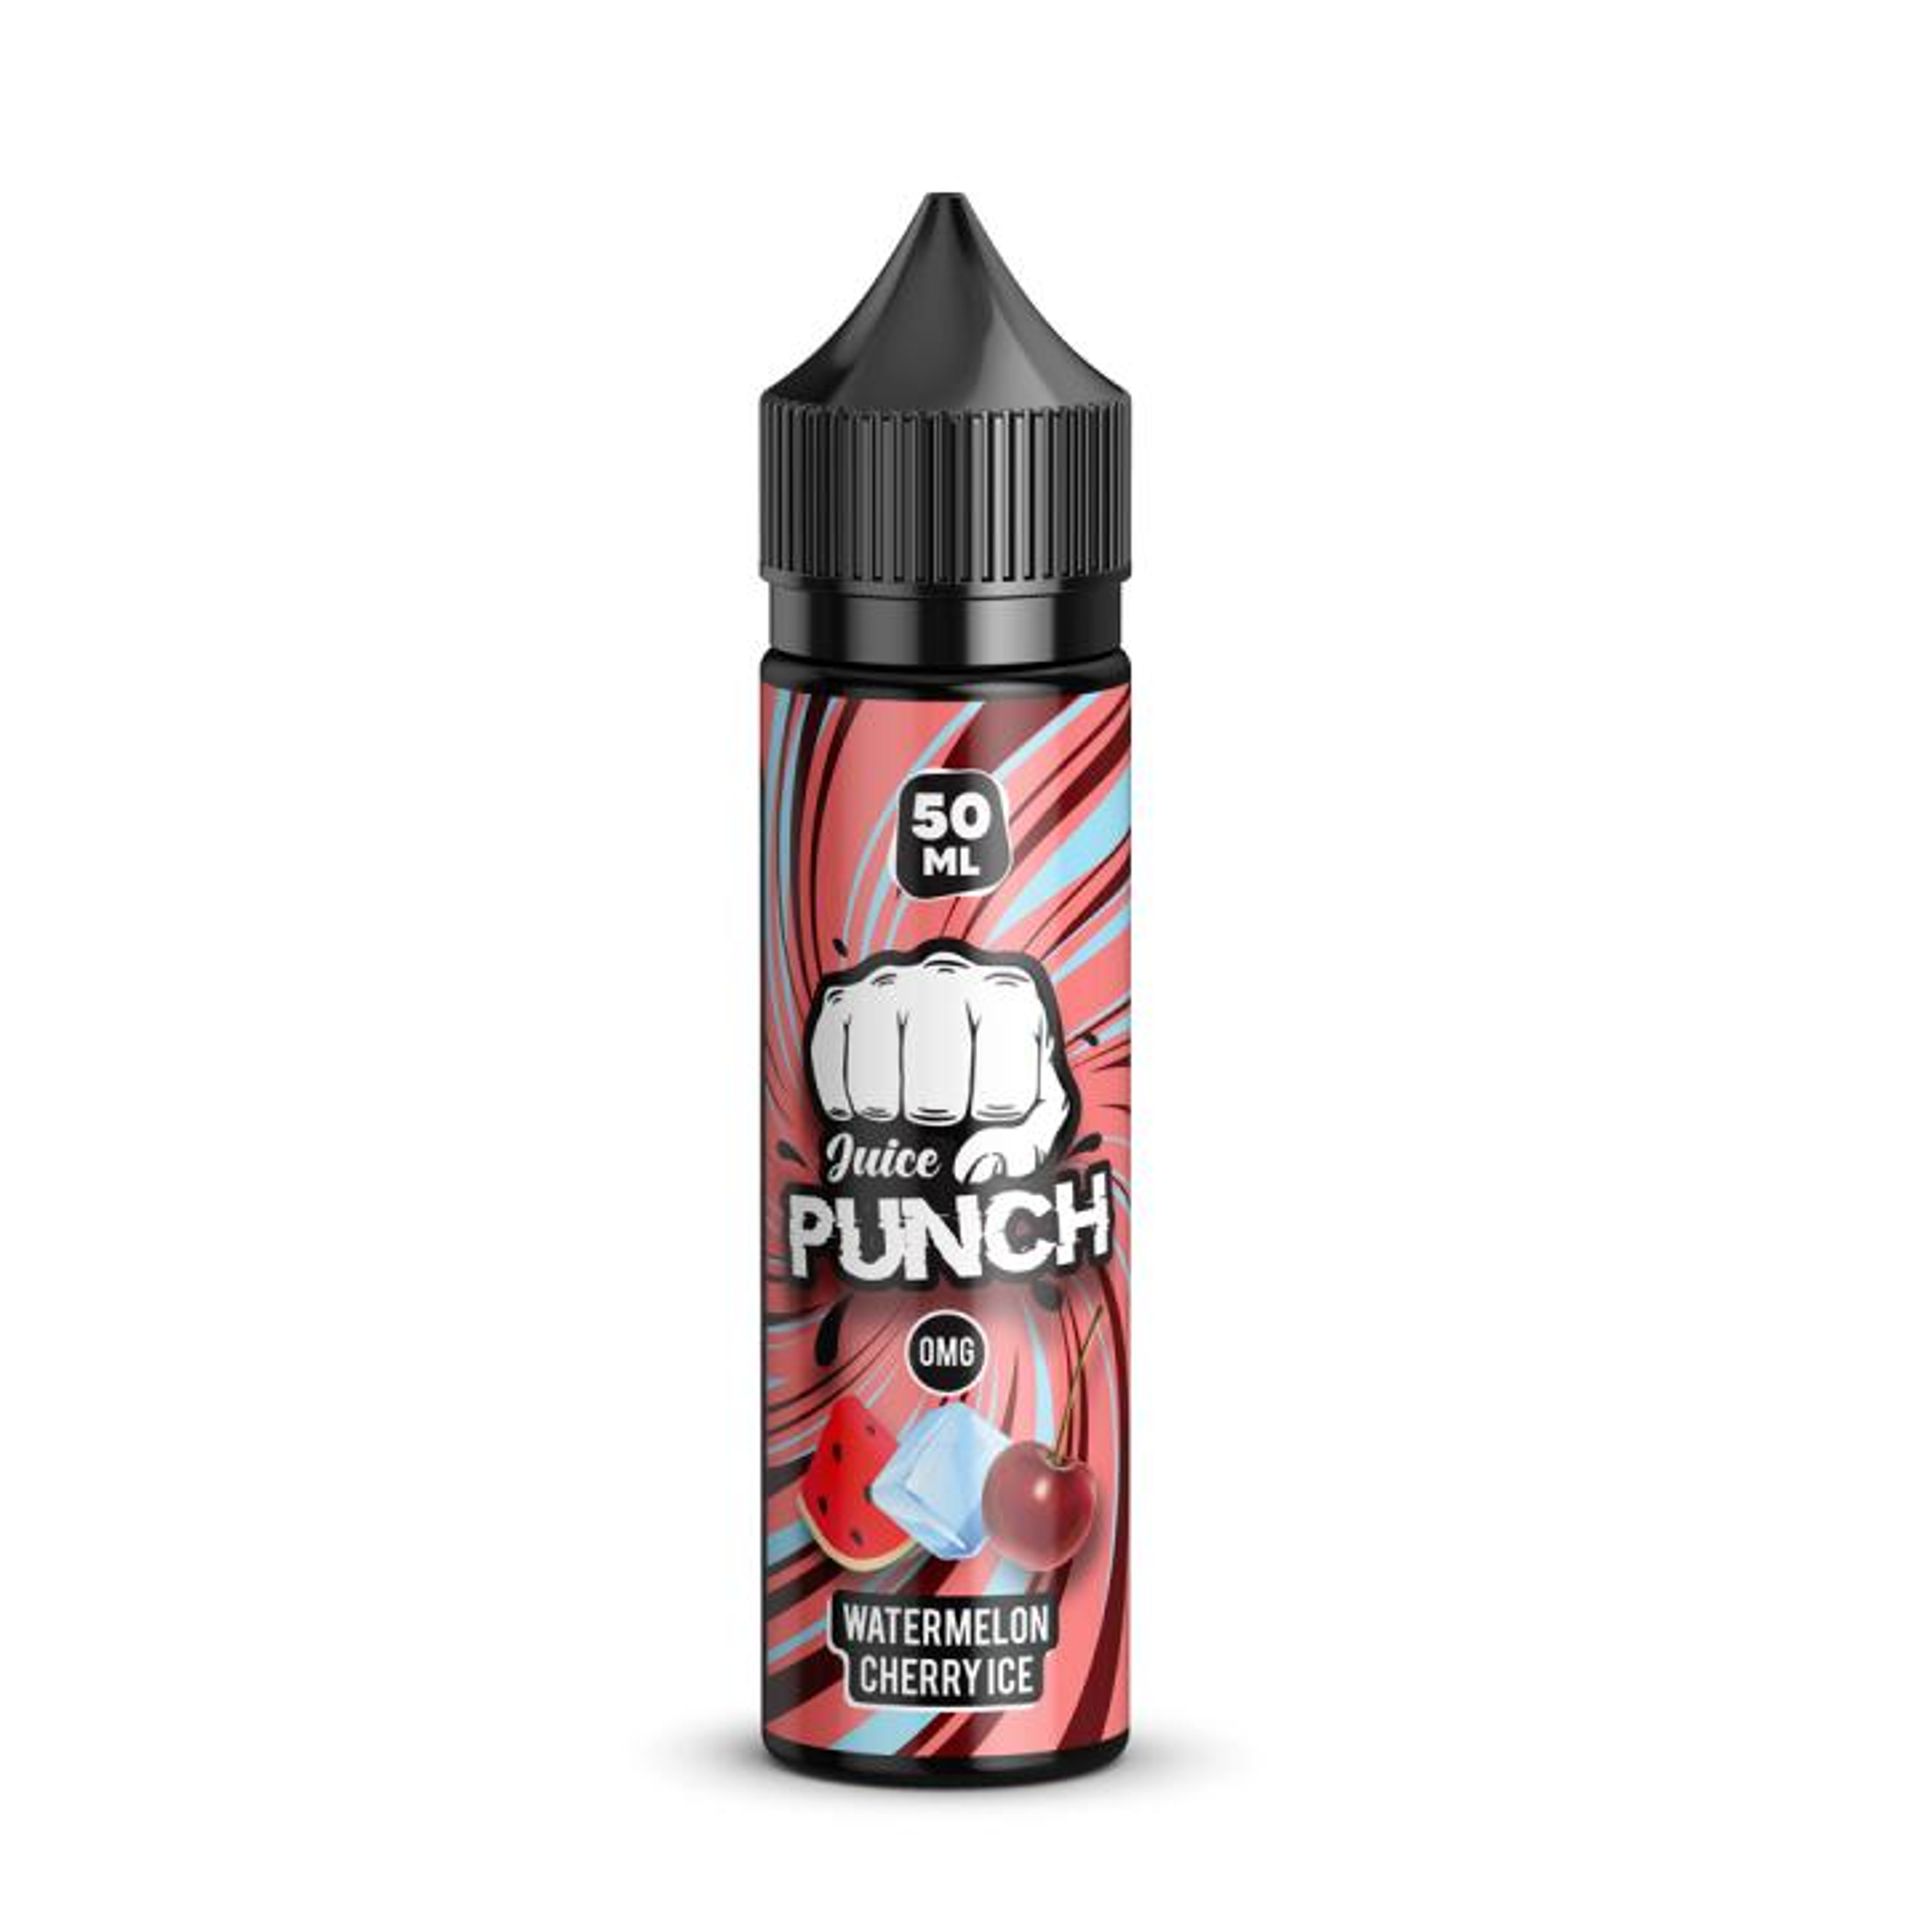 Image of Watermelon Cherry Ice by Juice Punch